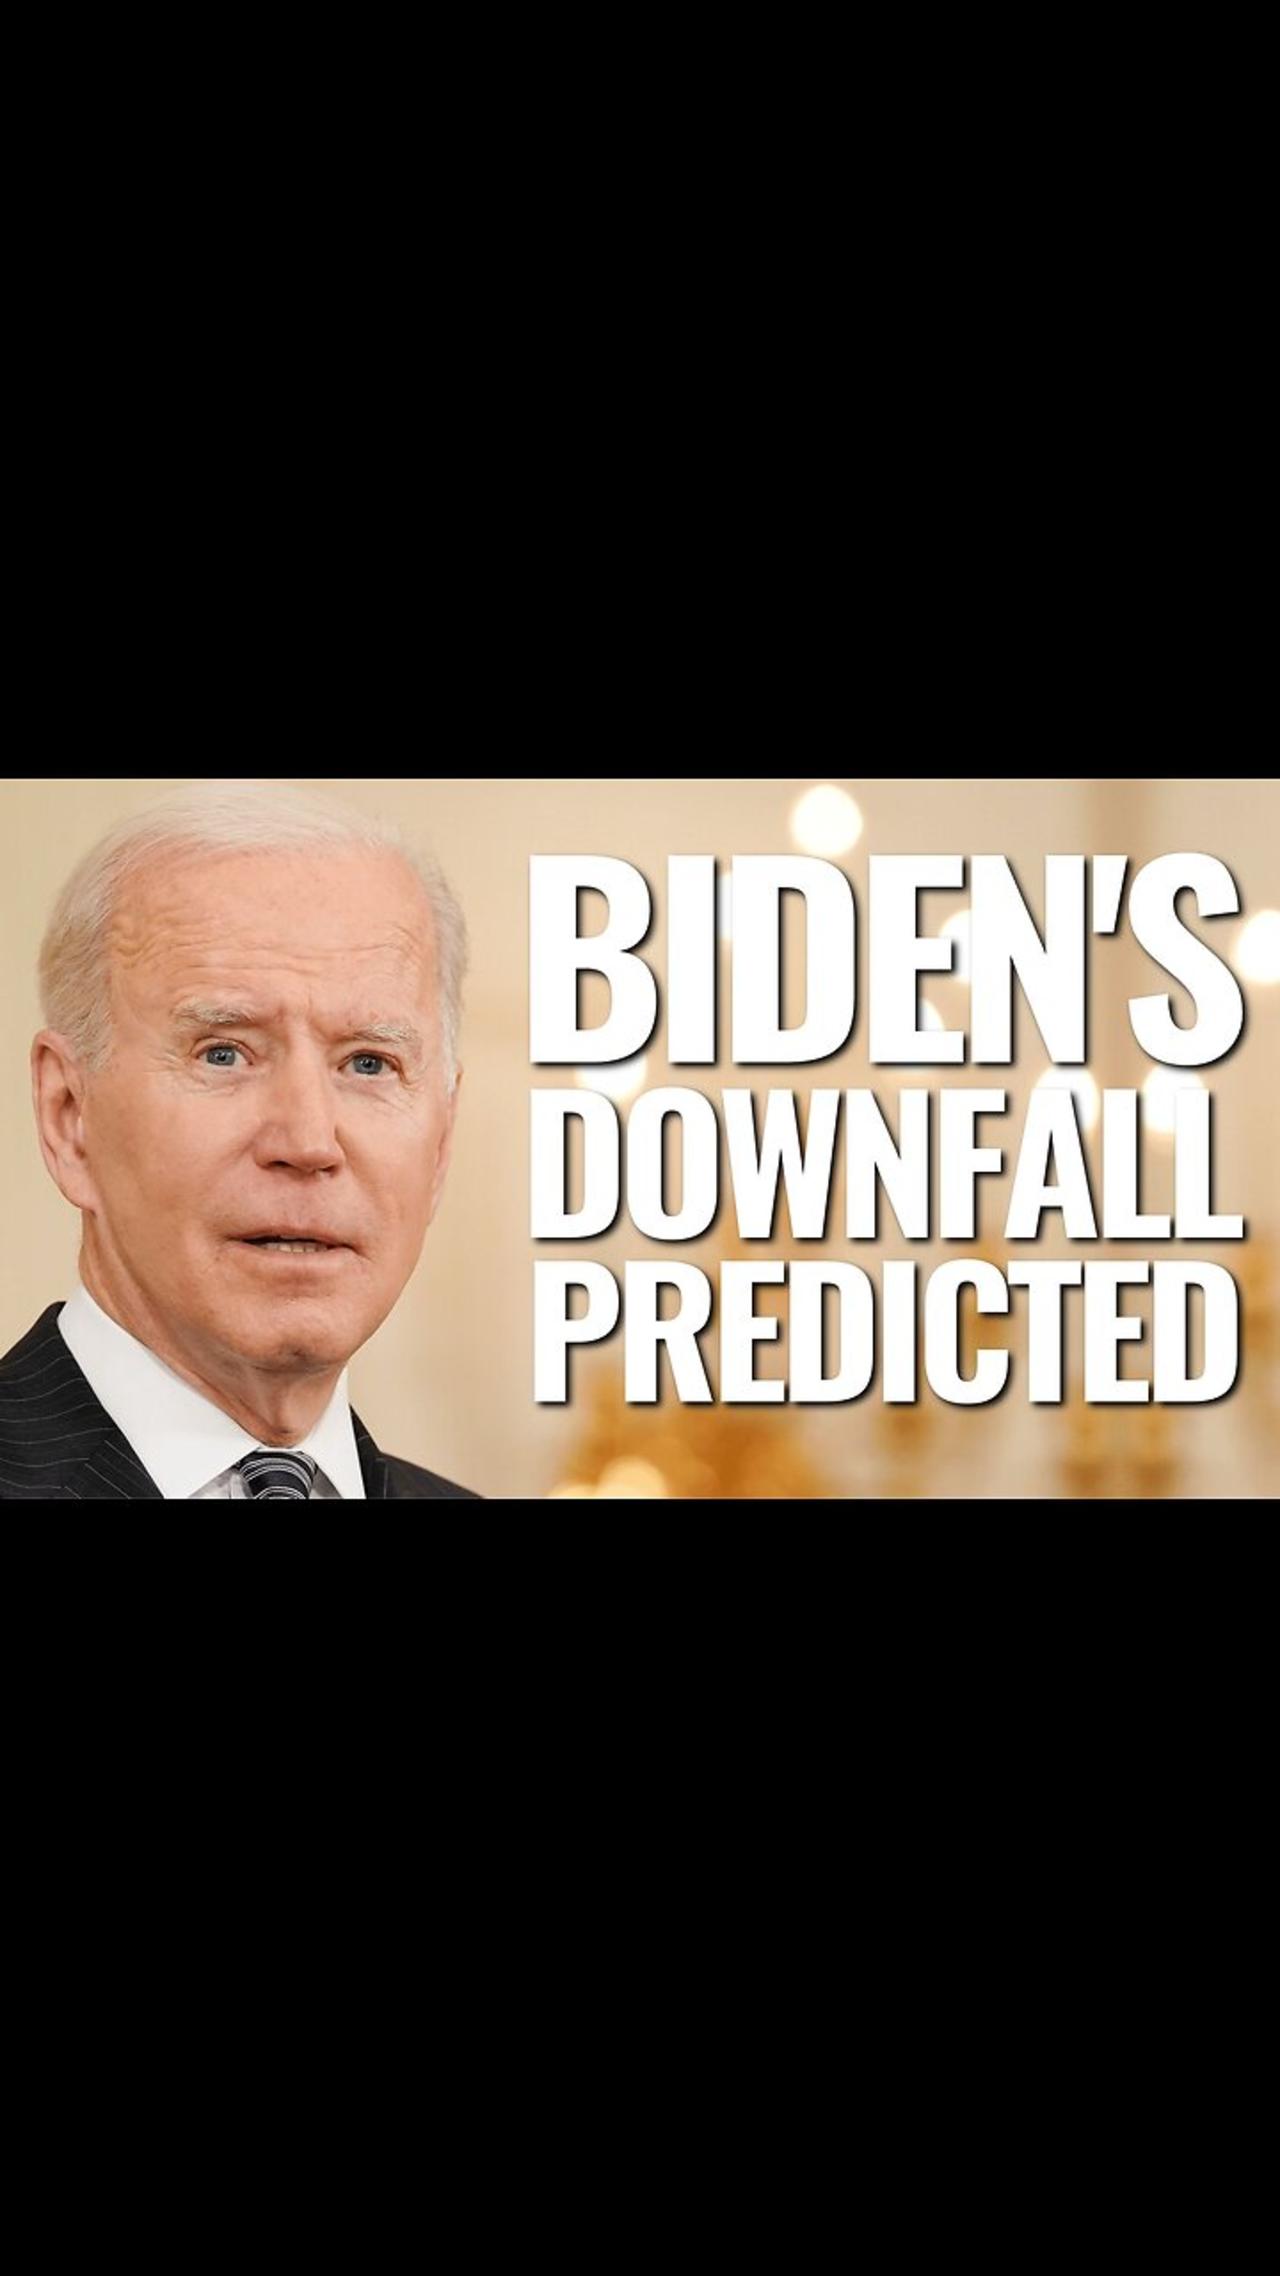 Will Joe Biden be removed from the White House before 2024?